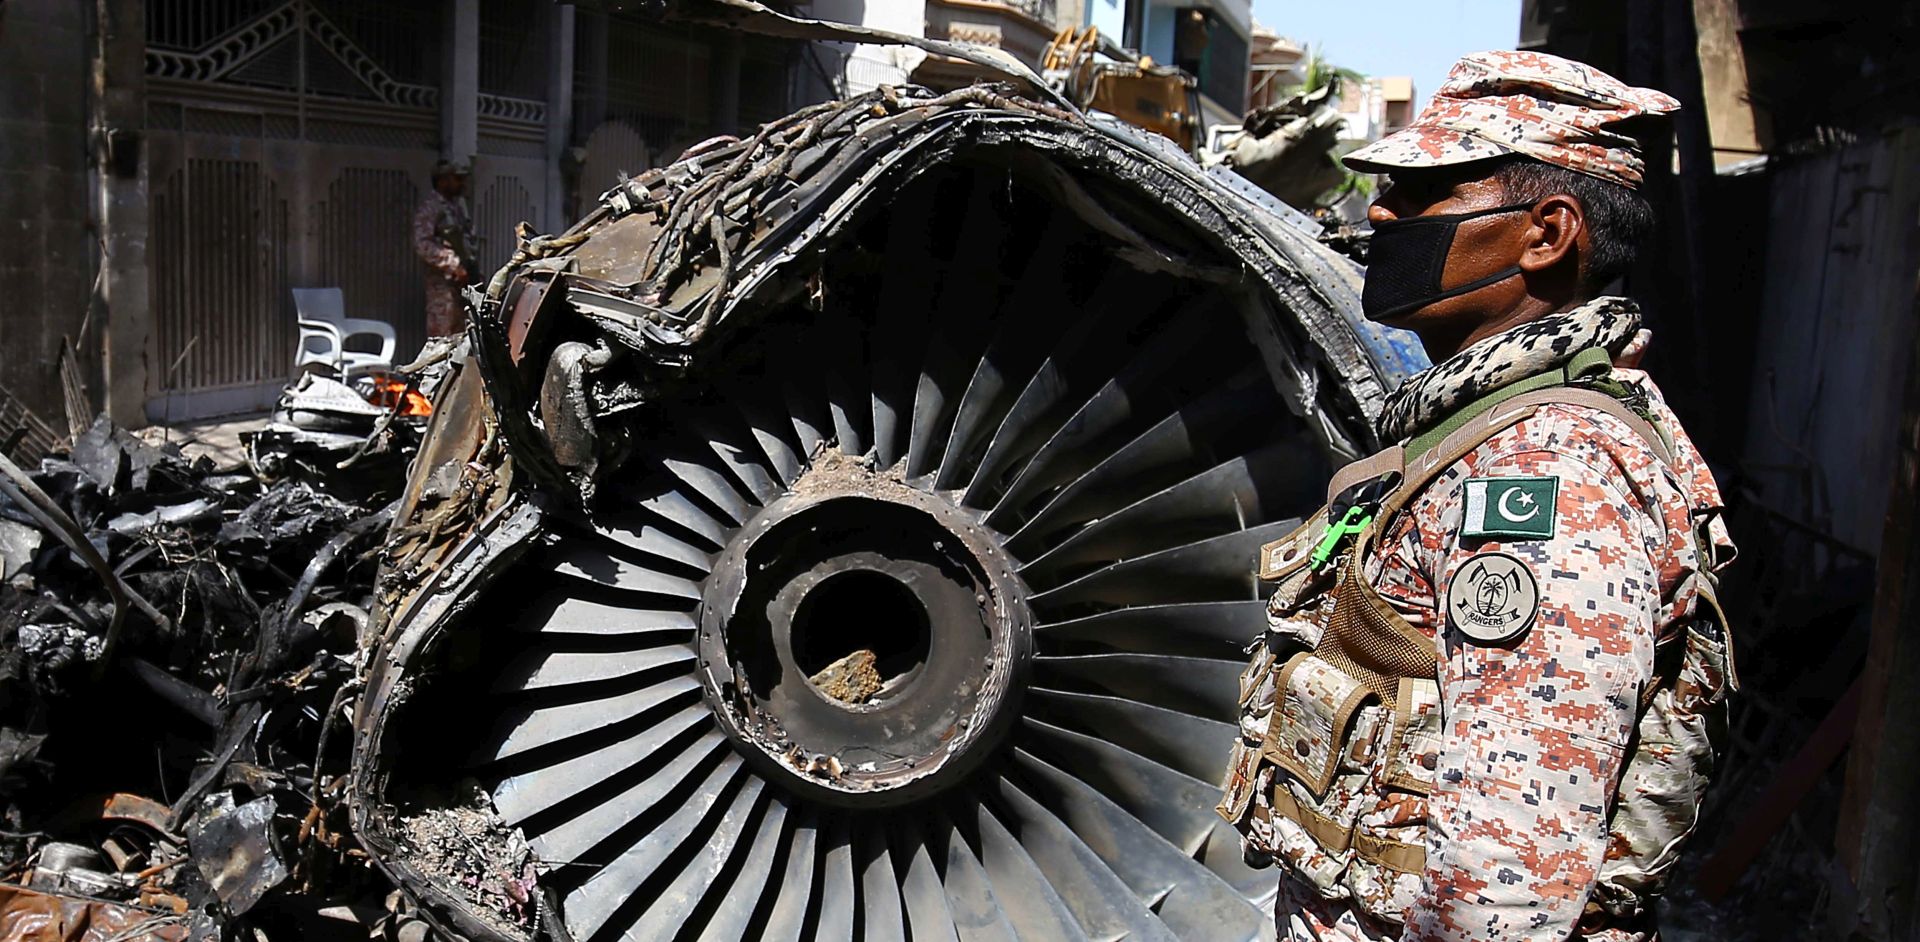 epa08441448 Wreckage of state run Pakistan International Airlines, Airbus A320 is lying amid houses of a residential colony days after it crashed, in Karachi, Pakistan, 24 May 2020. The death toll in a plane crash in Pakistan rose to 97 on 23 May after rescue teams spent the night searching for survivors among the rubble in a residential area in the port city of Karachi, where the state-owned Pakistan International Airlines (PIA) flight with 99 people on board crashed on 22 May.  EPA/SHAHZAIB AKBER